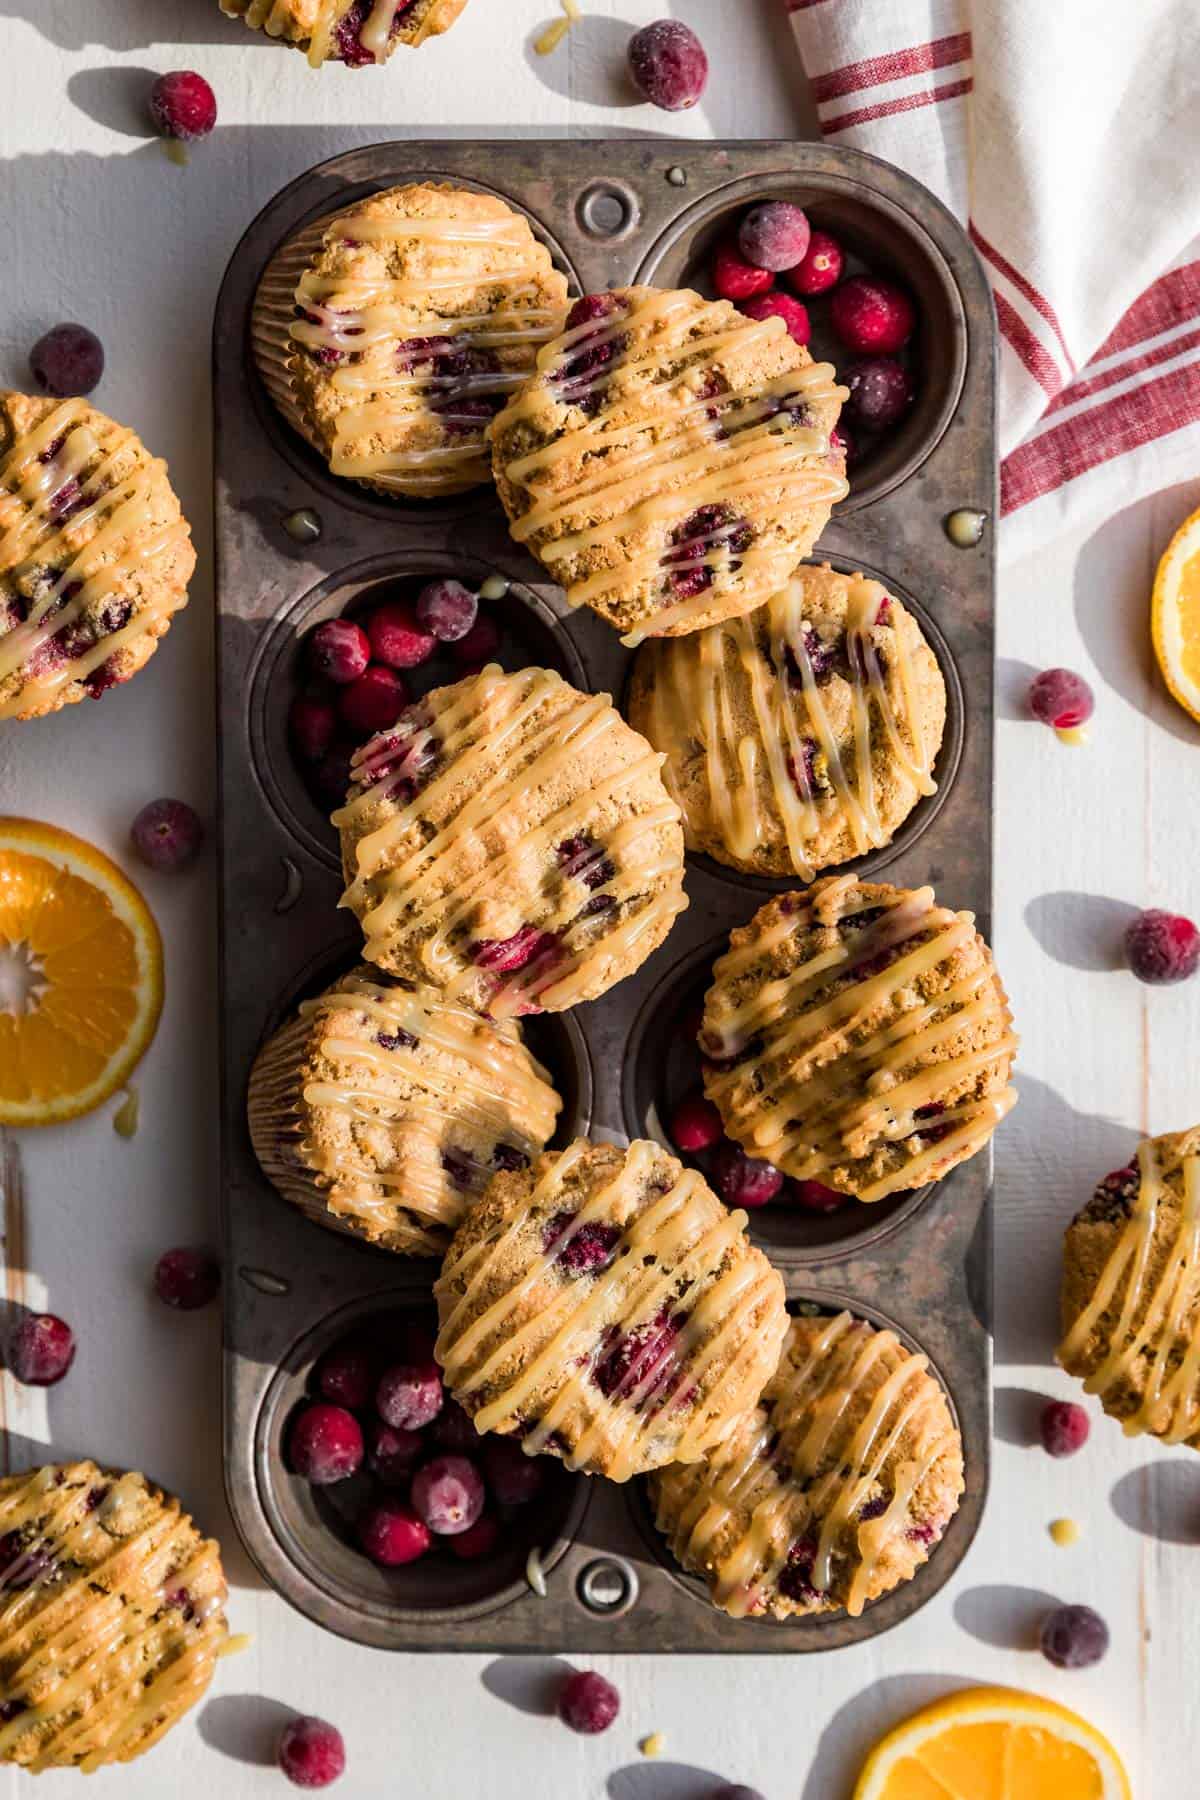 Cranberry Orange Muffins in an antique muffin tin with orange slices and cranberries around it.